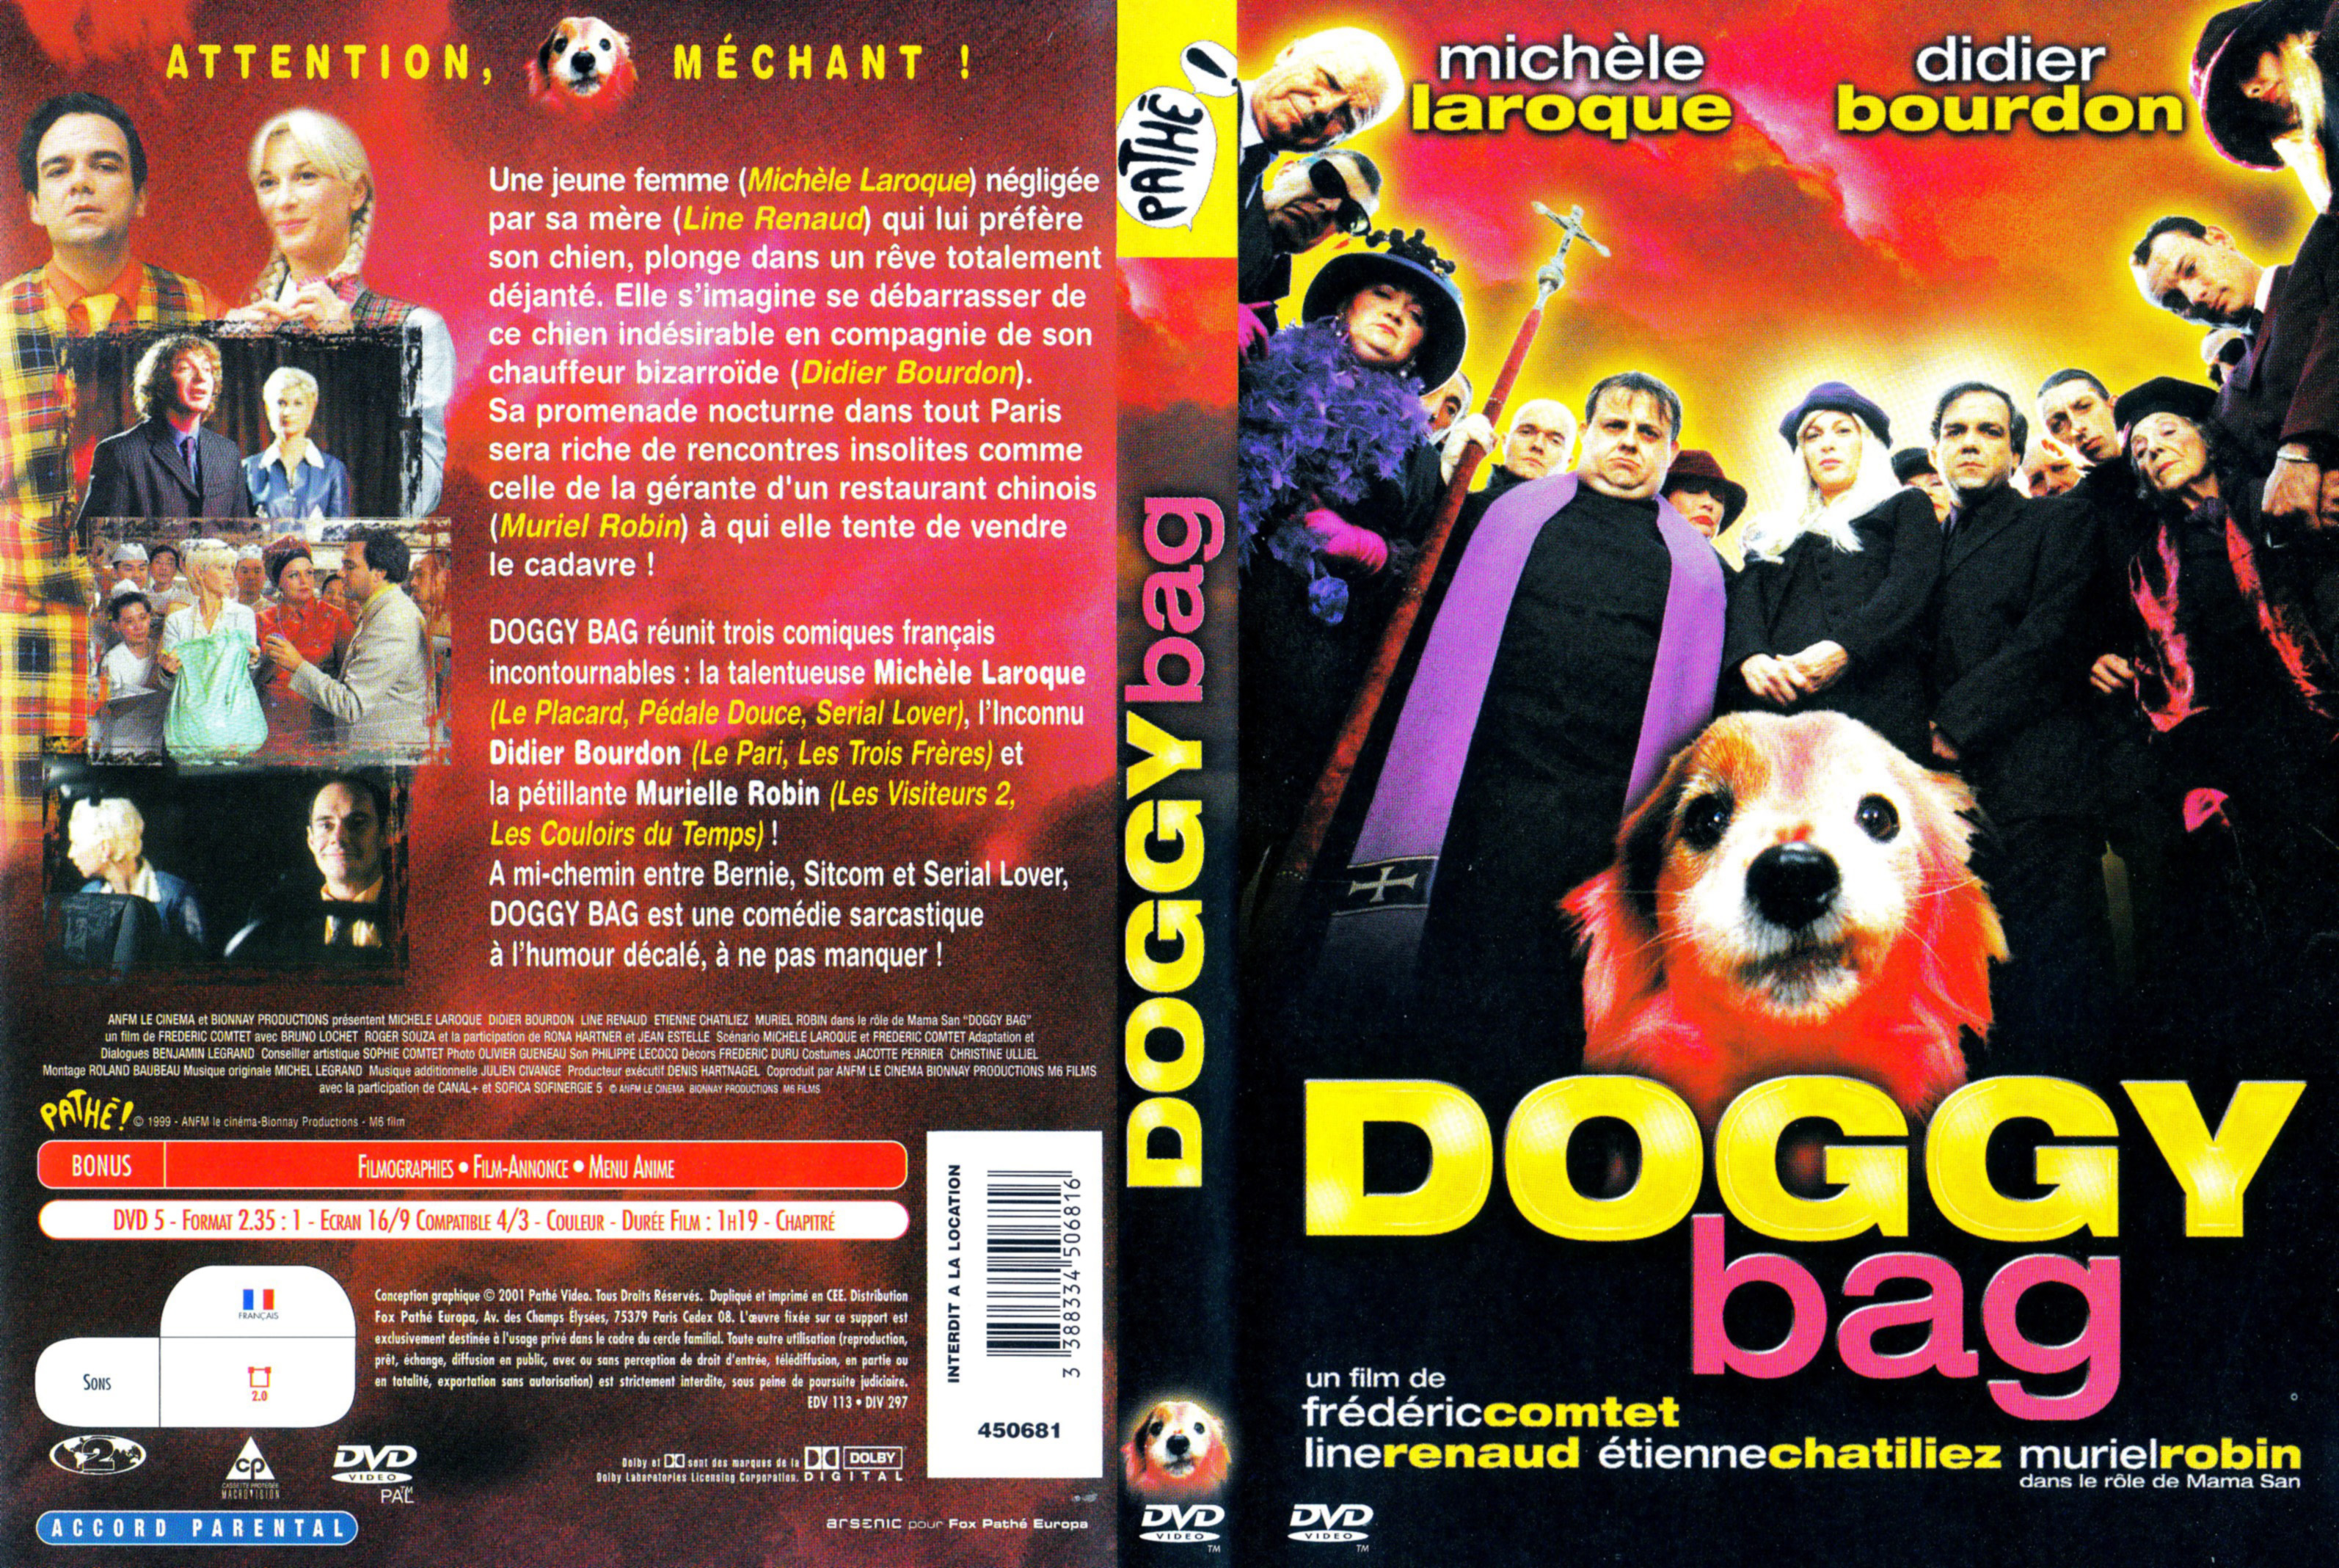 Jaquette DVD Doggy bag